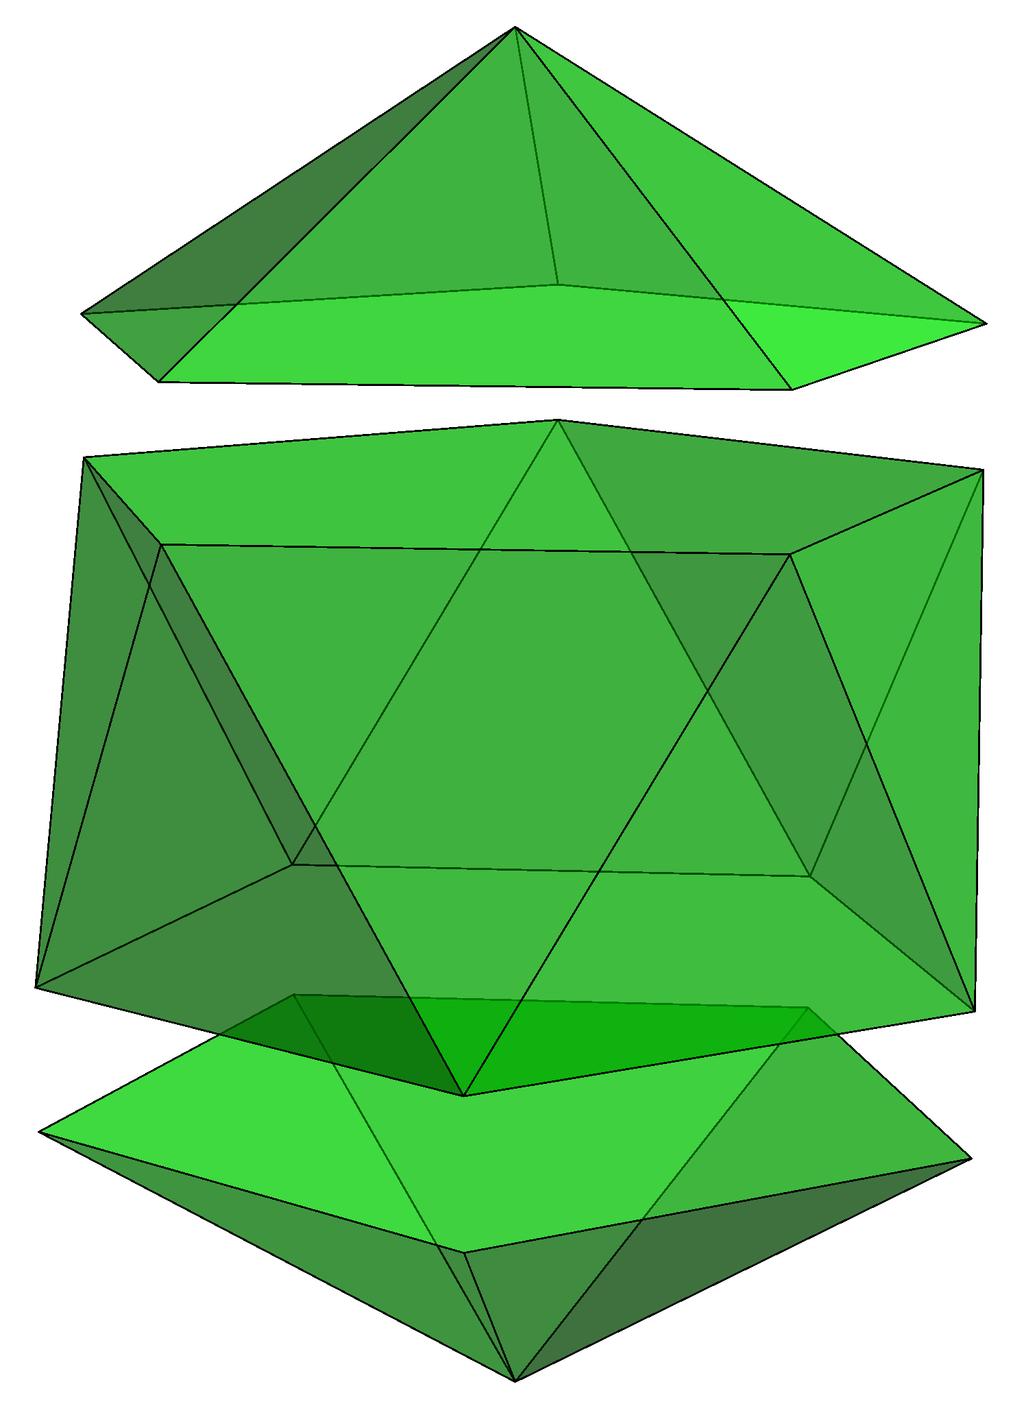 Our search for Platonic solids with triangular faces ends here, for one is easily